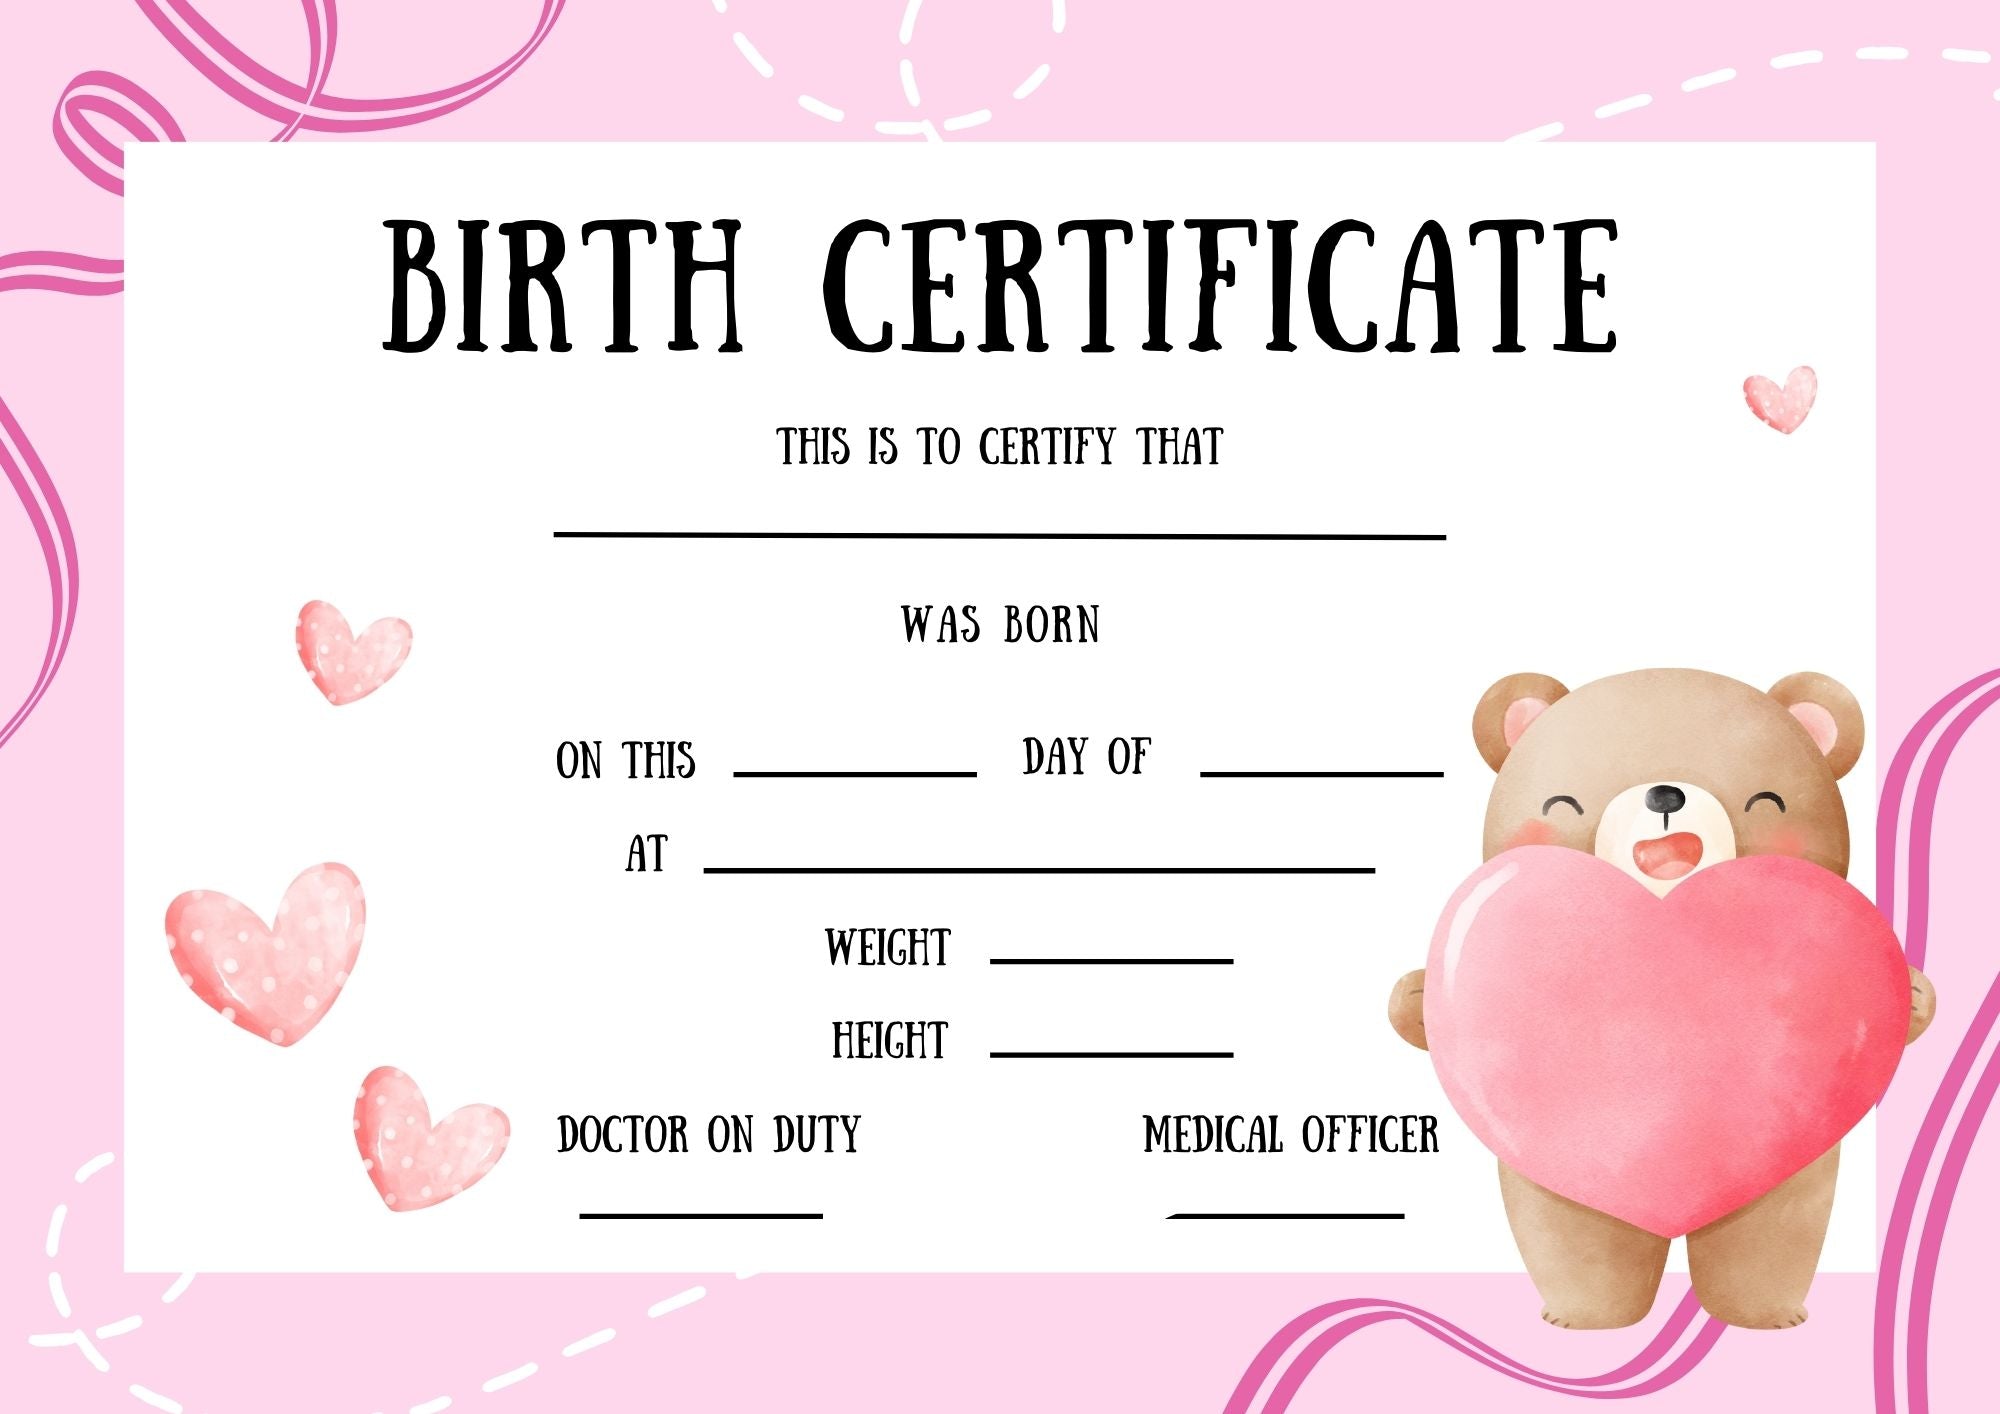 A colorful birth certificate template featuring a cute, fluffy Harrison Bear holding a heart, with pink and purple decorations and spaces for personal details from The Teddy Factory.